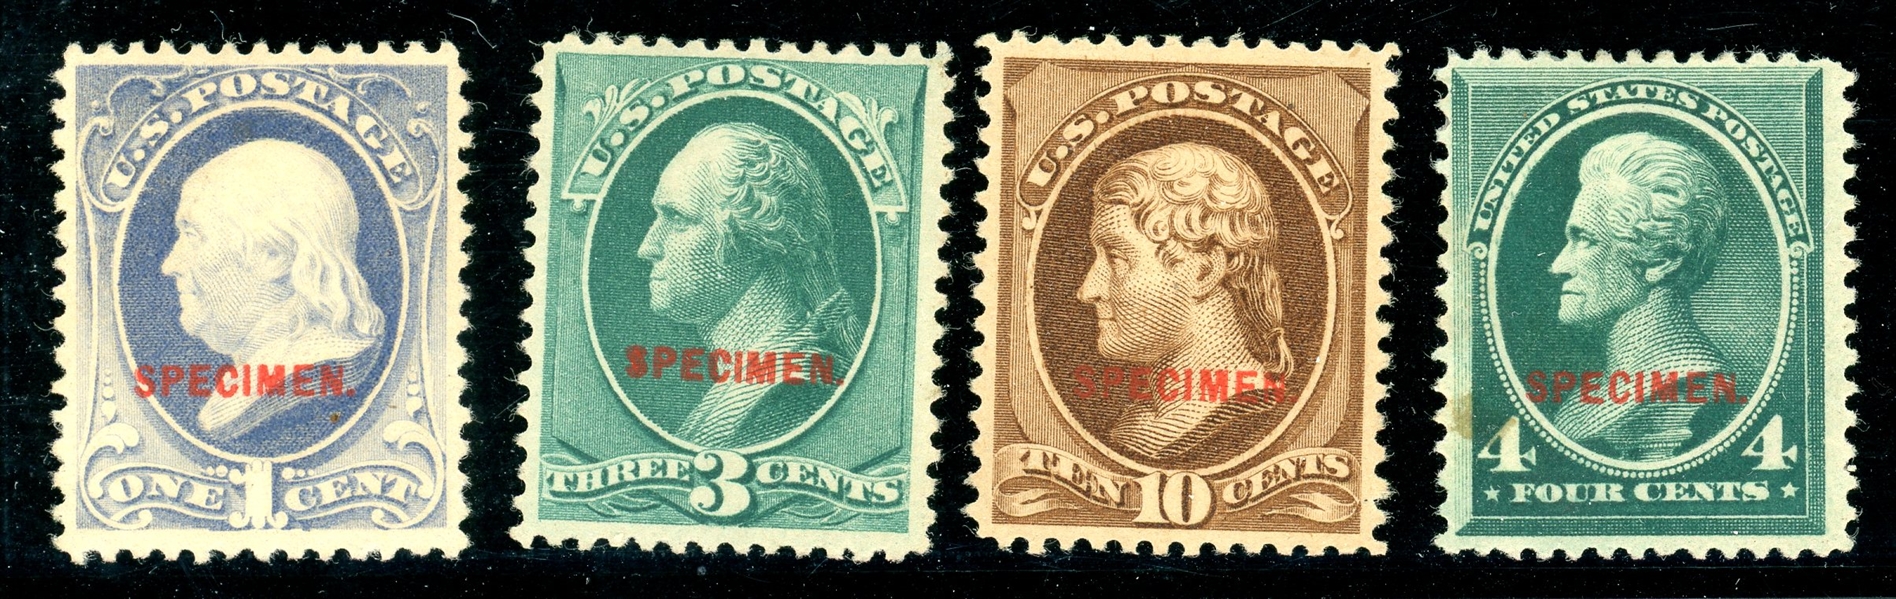 Group of 4 Different Type D Specimens, Fine or Better (SCV $340)